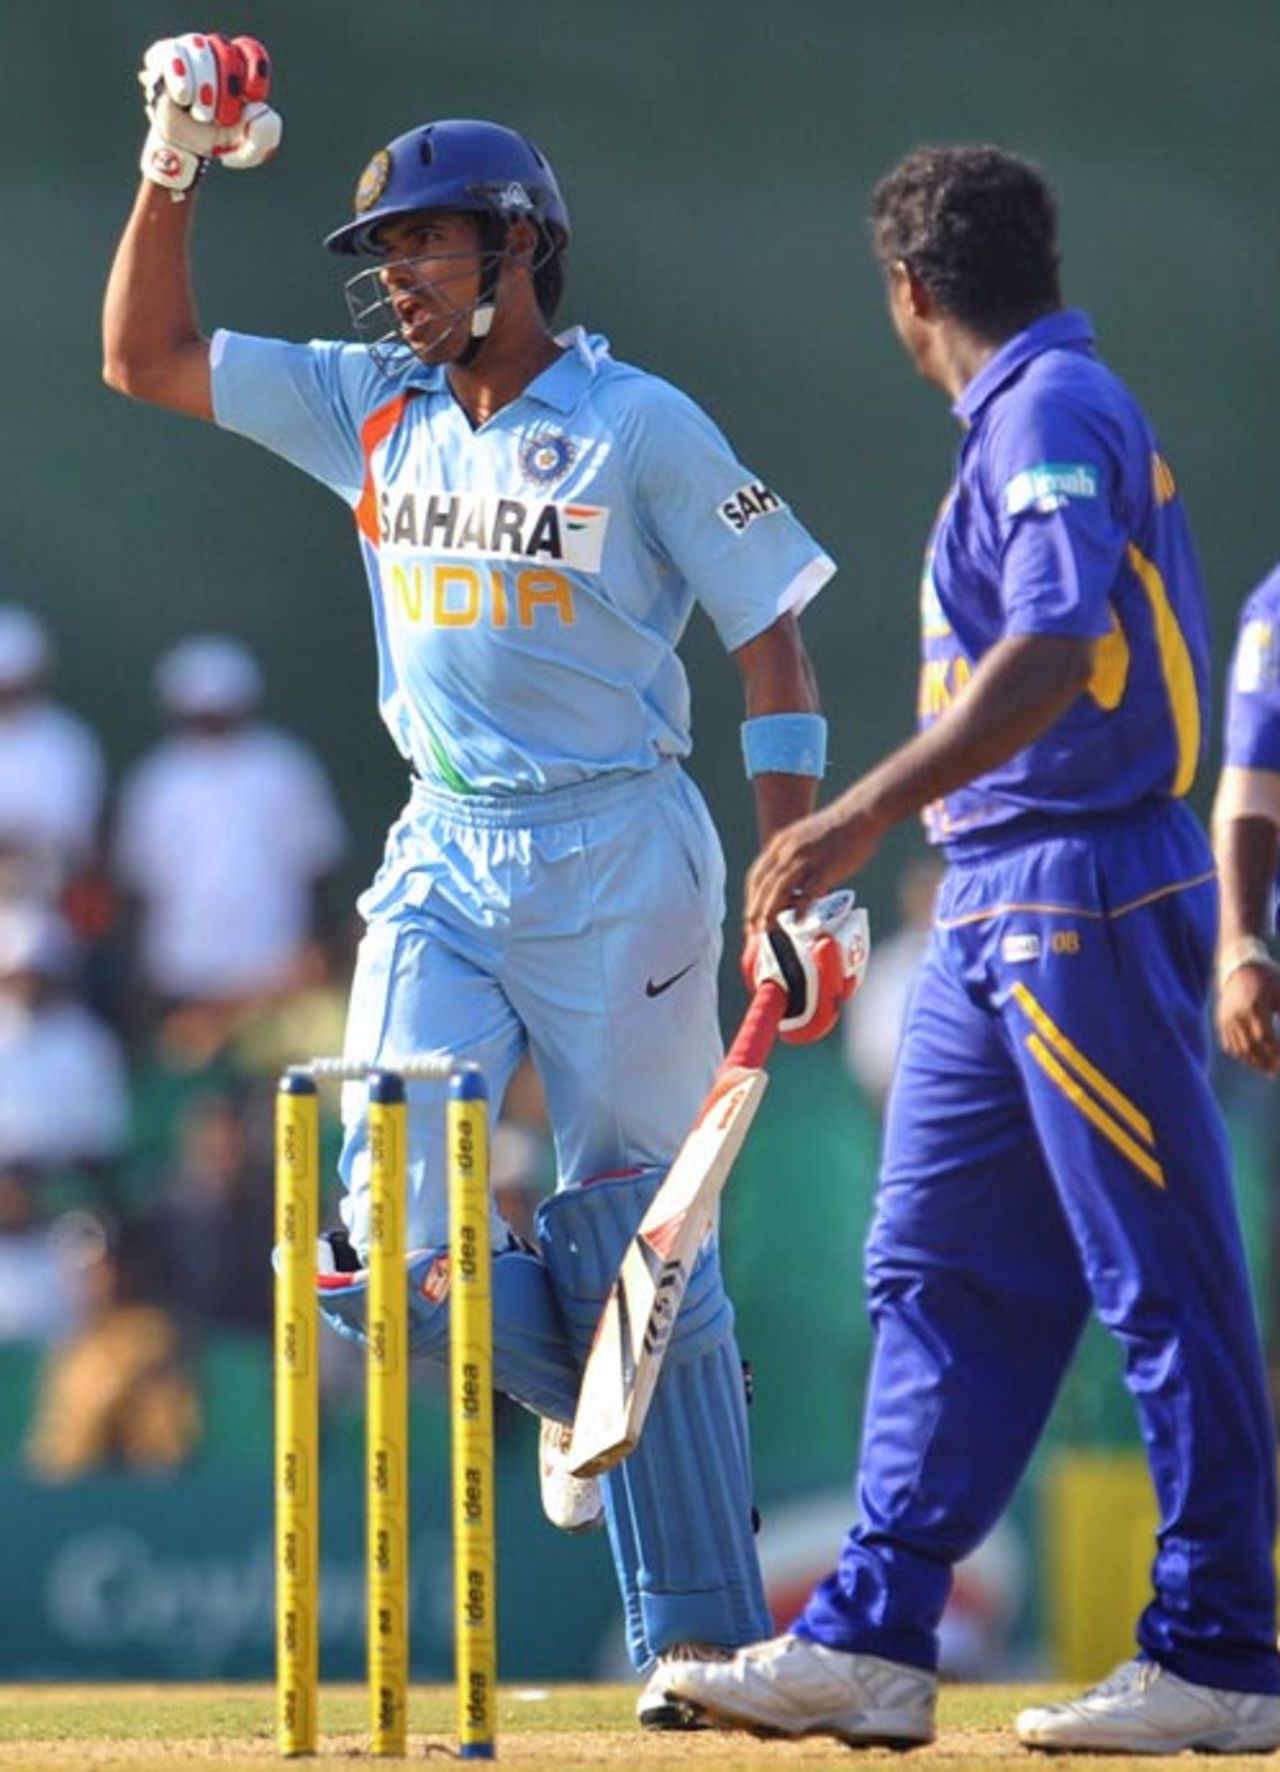 S Badrinath punches the air after securing the win, Sri Lanka v India, 2nd ODI, Dambulla, August 20, 2008